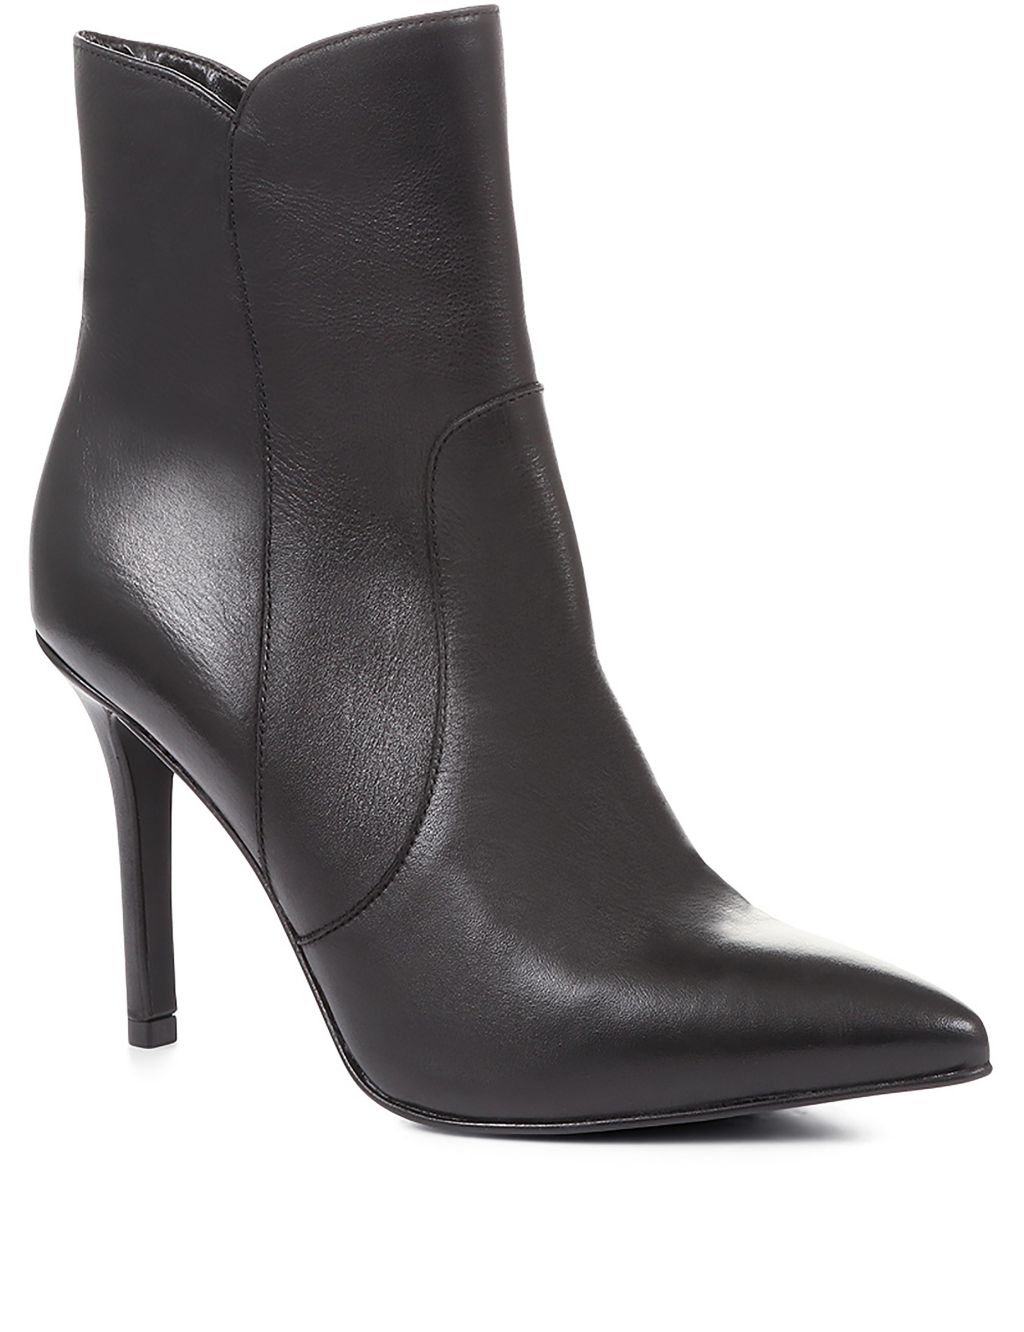 Leather Stiletto Heel Ankle Boots image 3